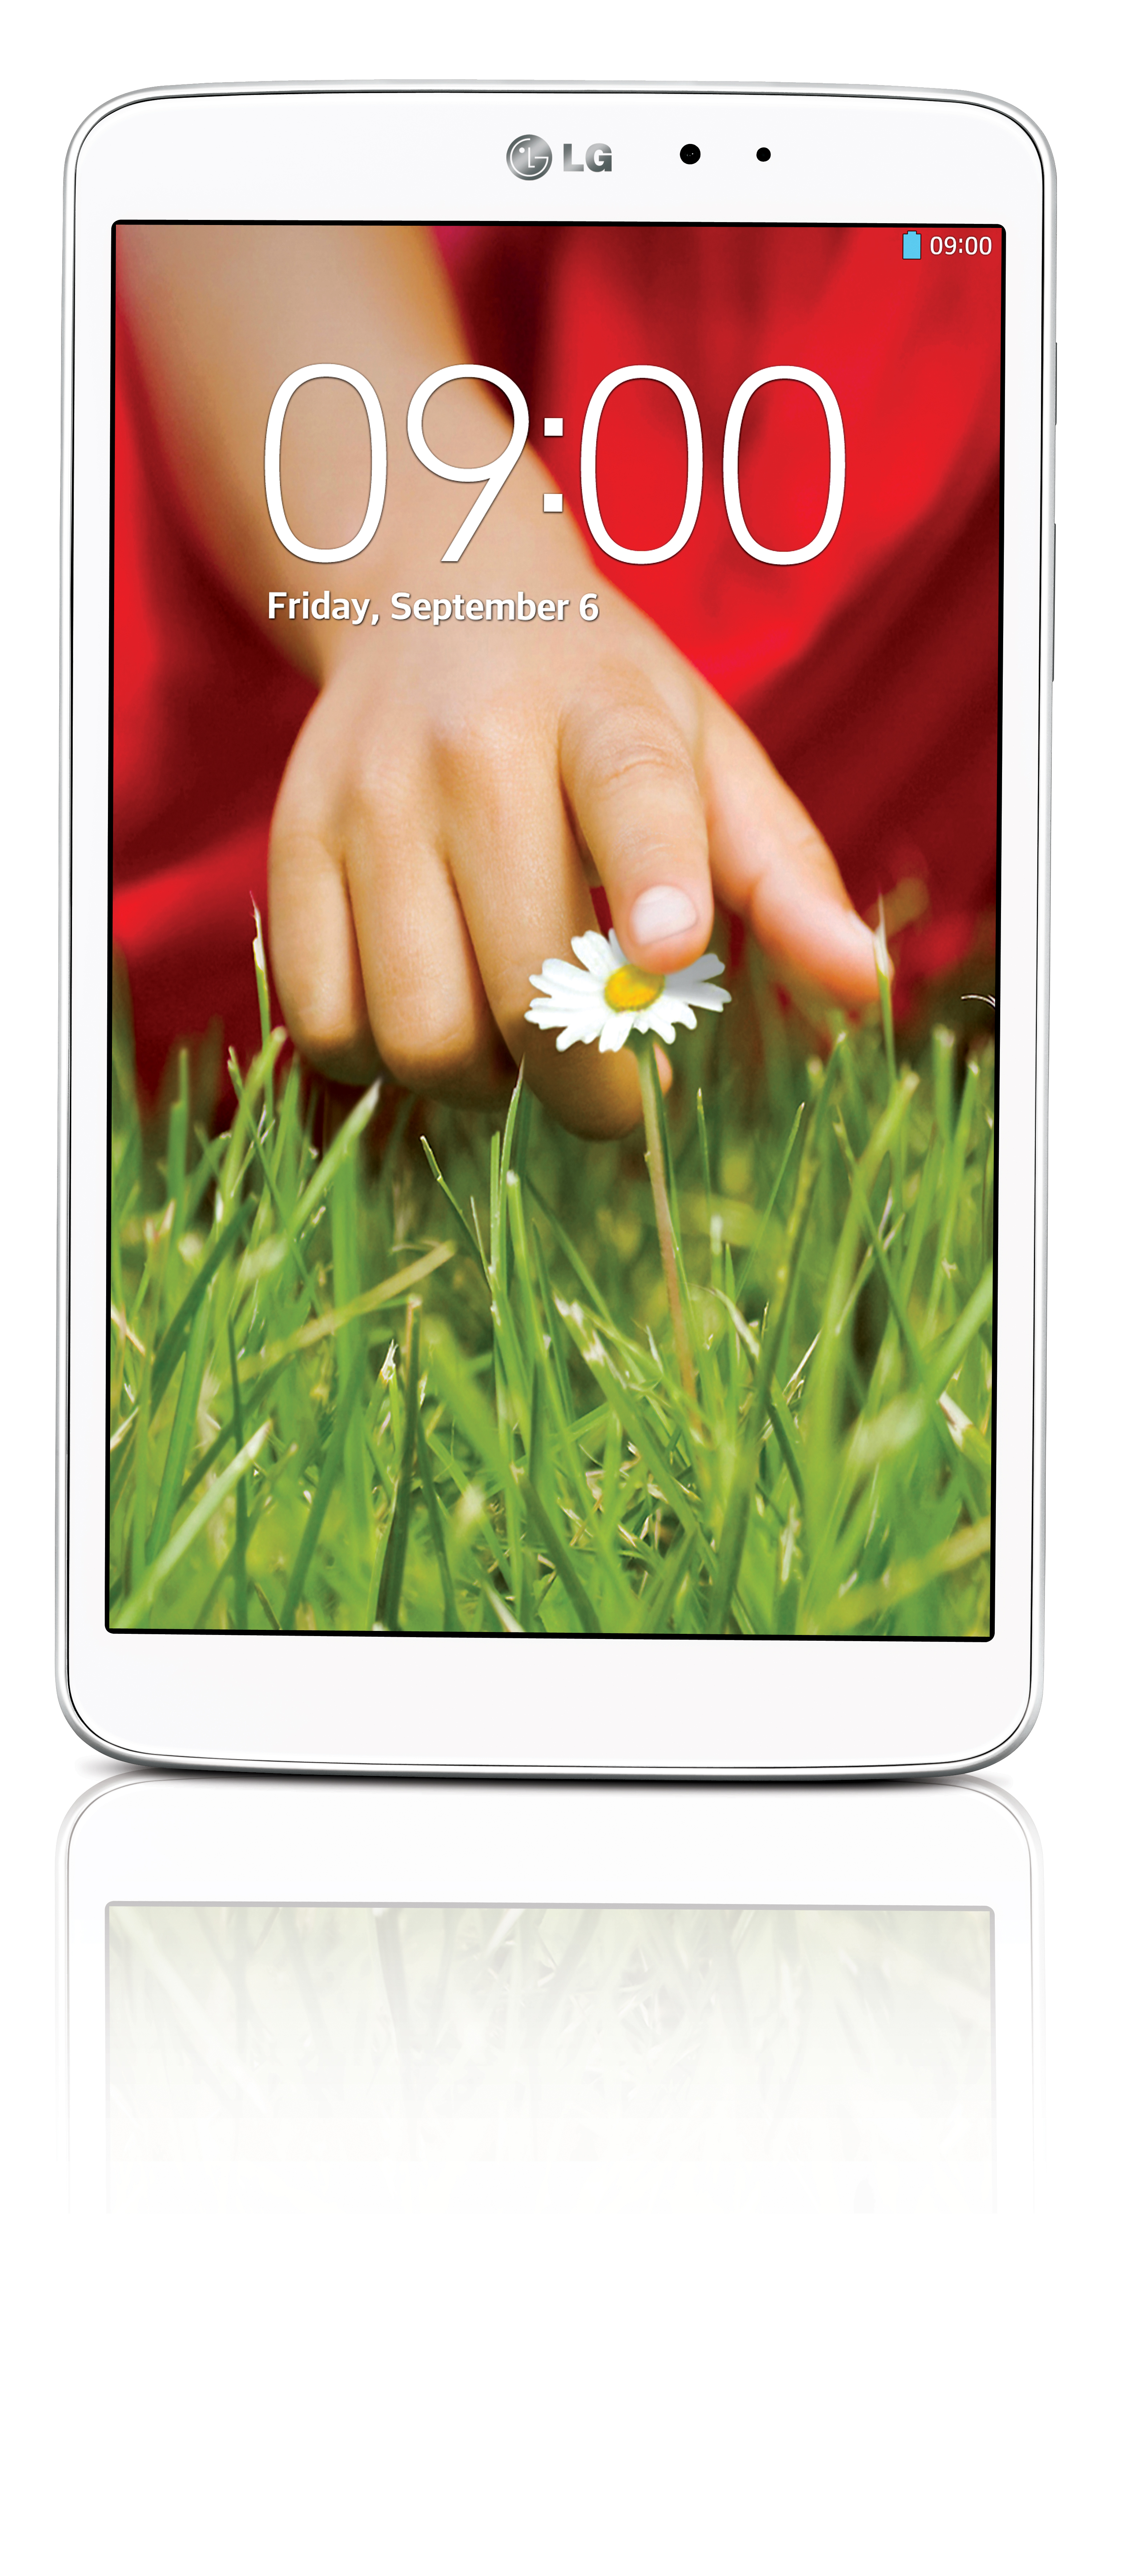 A front view of LG G Pad 8.3 in white color.